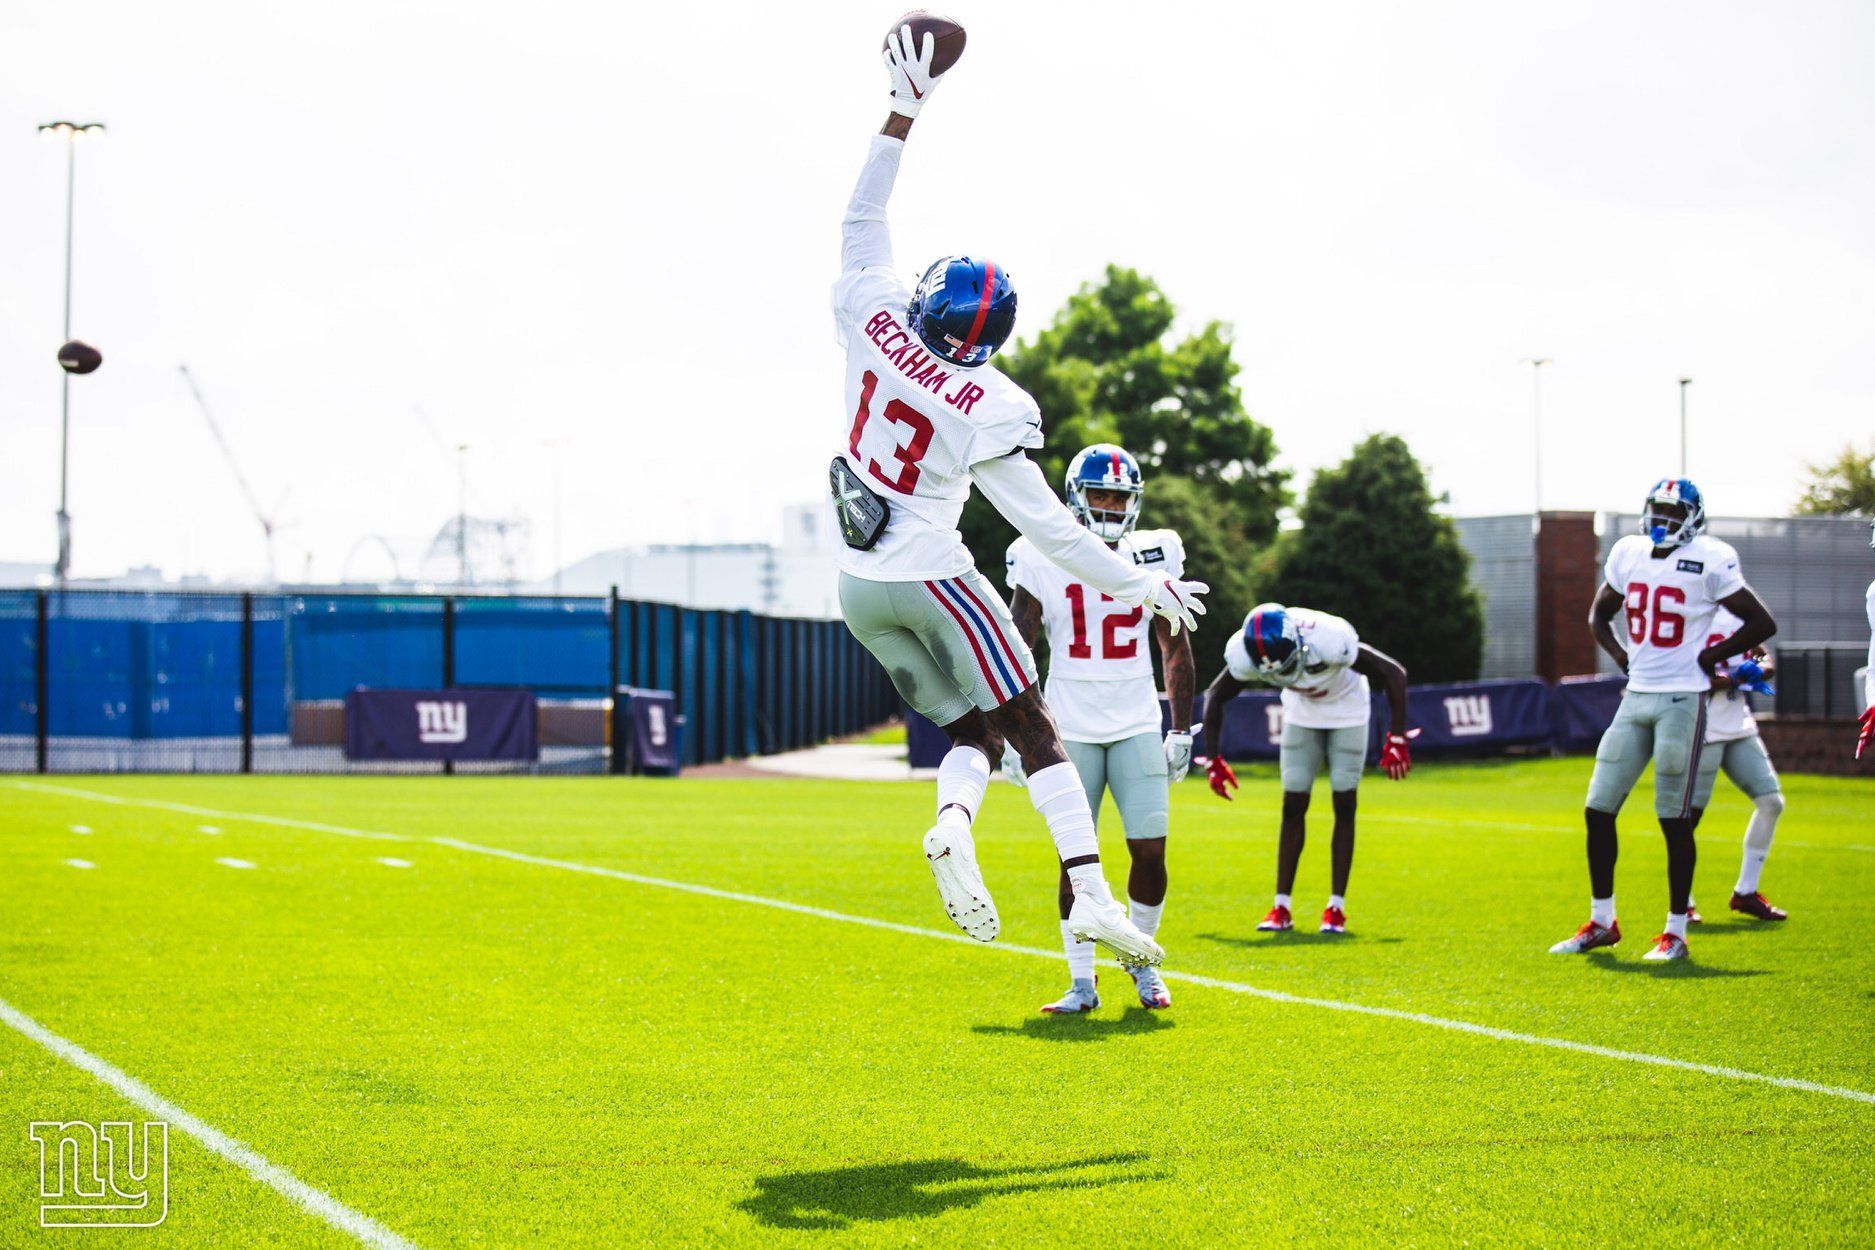 Odell Beckham Jr. one handed practice catch #NYG #OBJ. Beckham jr, Odell beckham jr catch, Odell beckham catch